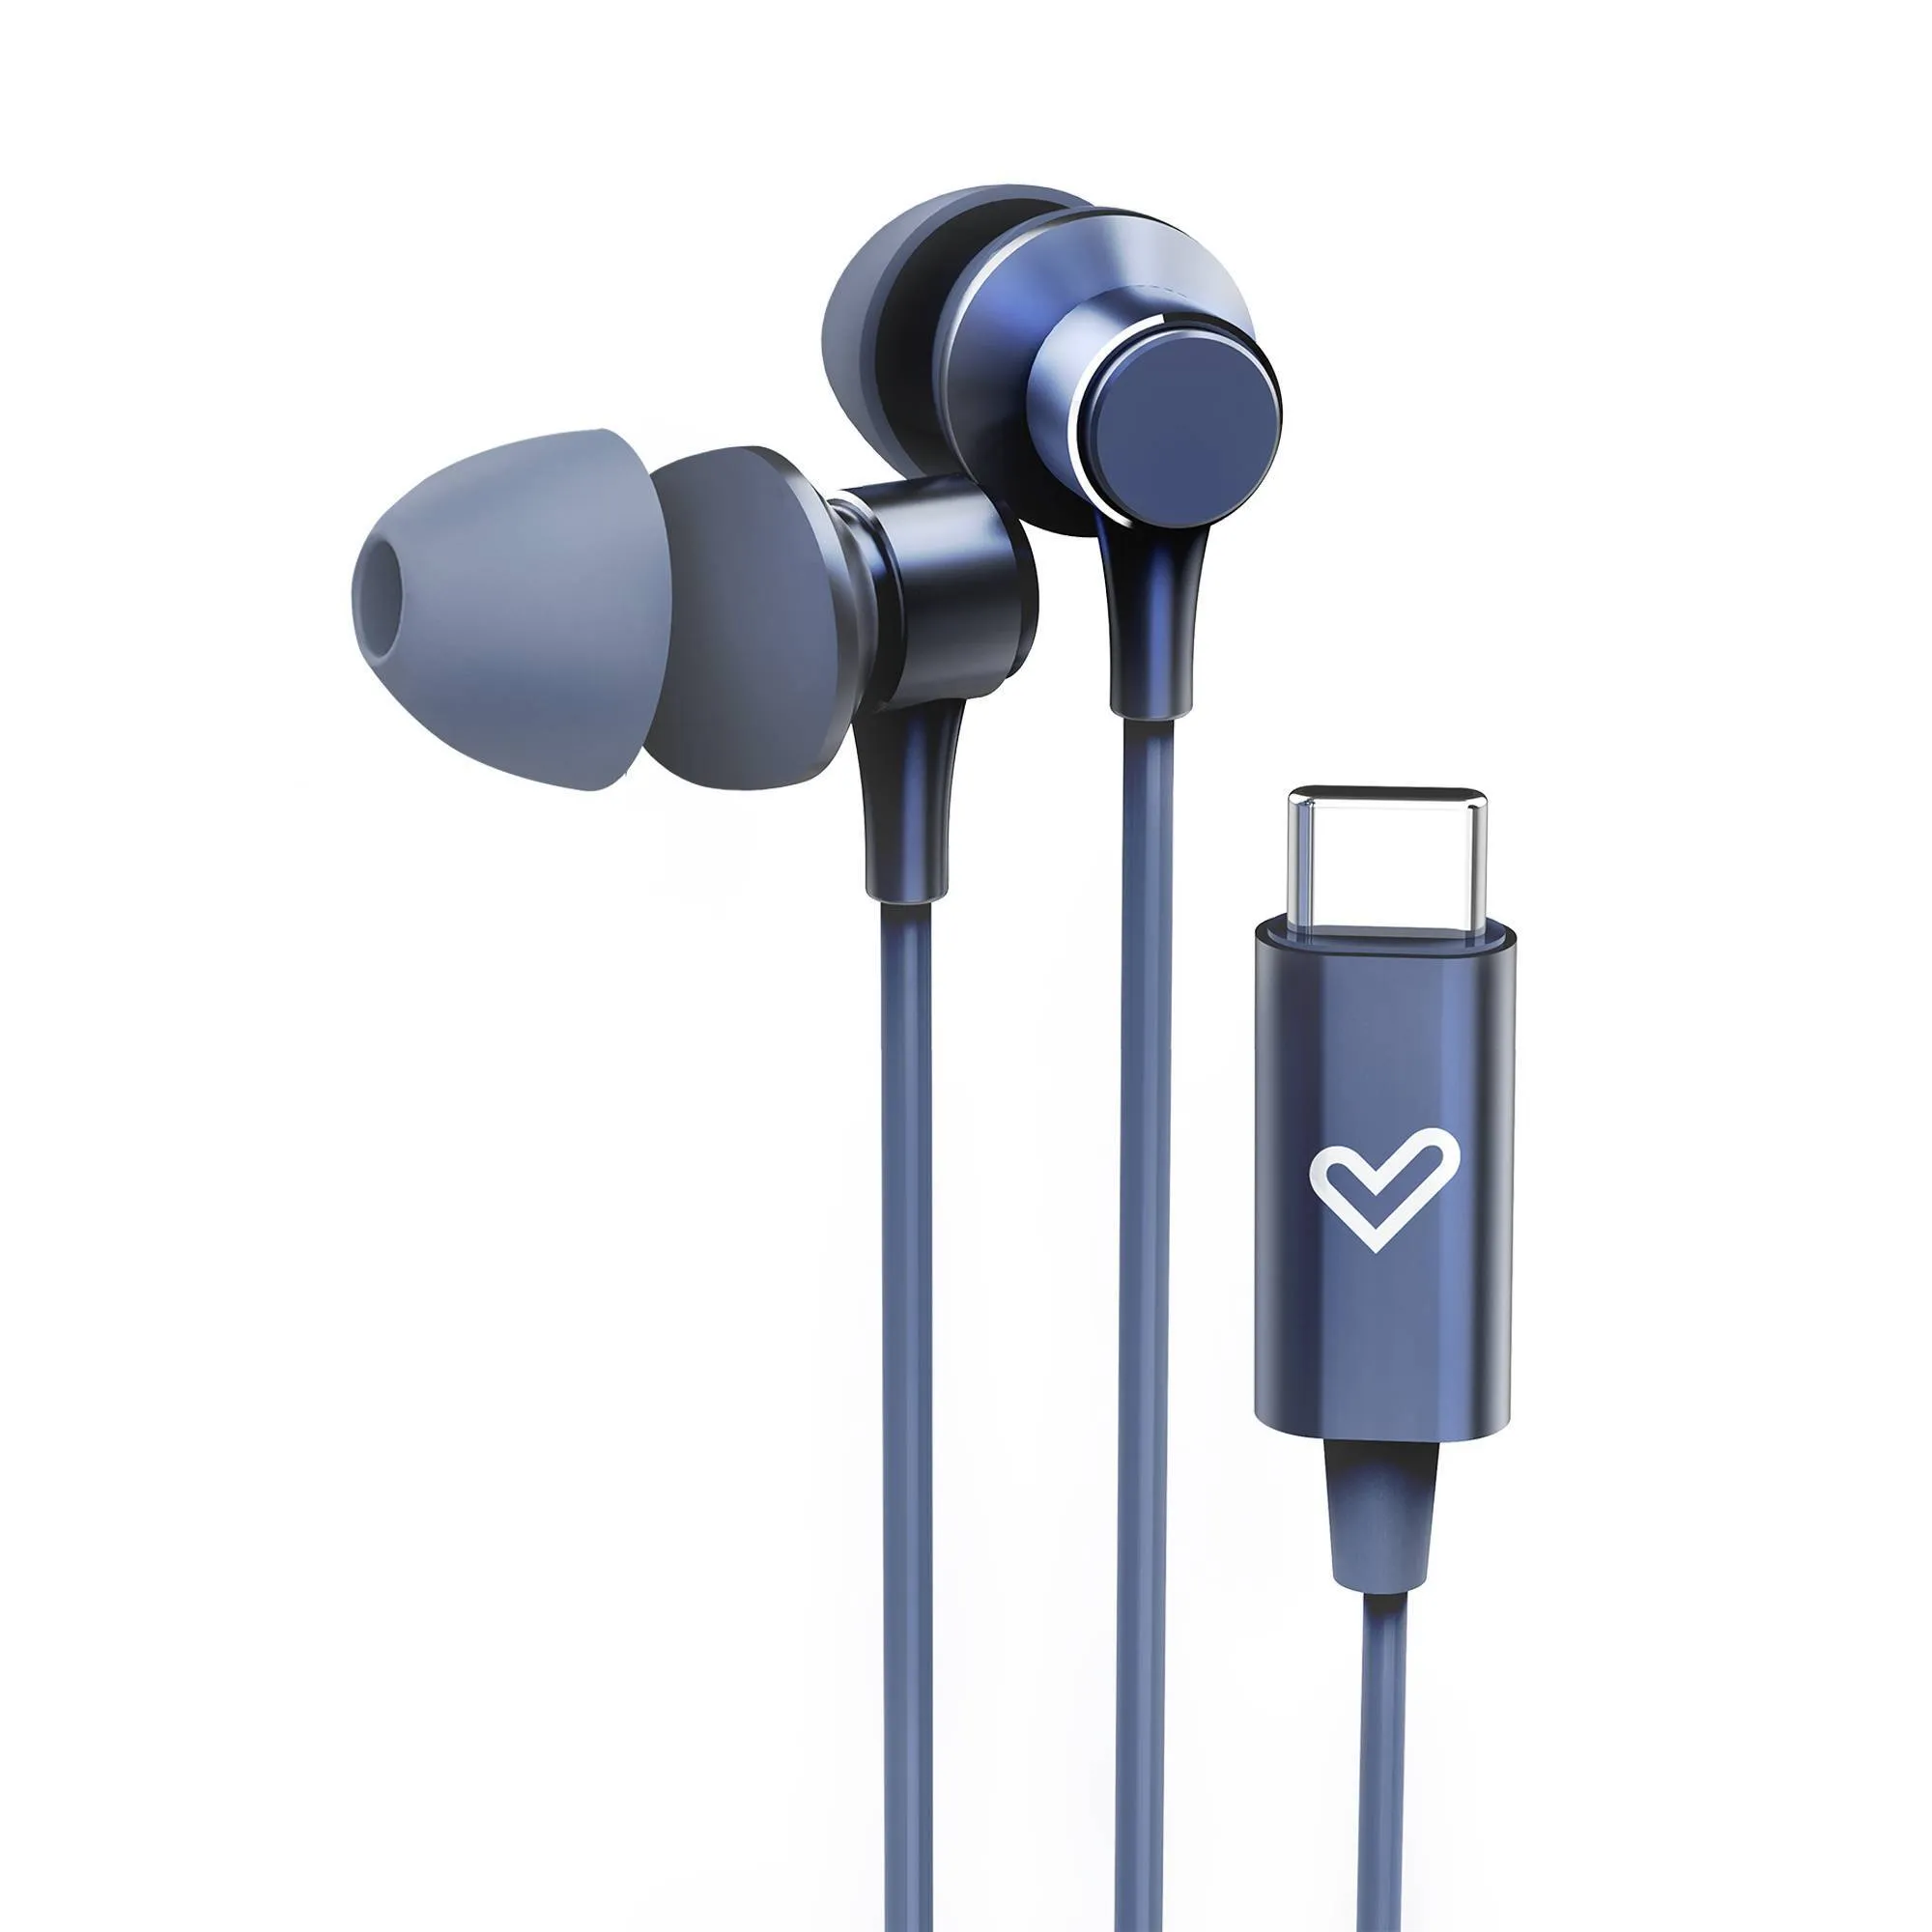 Metallized Type C - Auriculares con cable